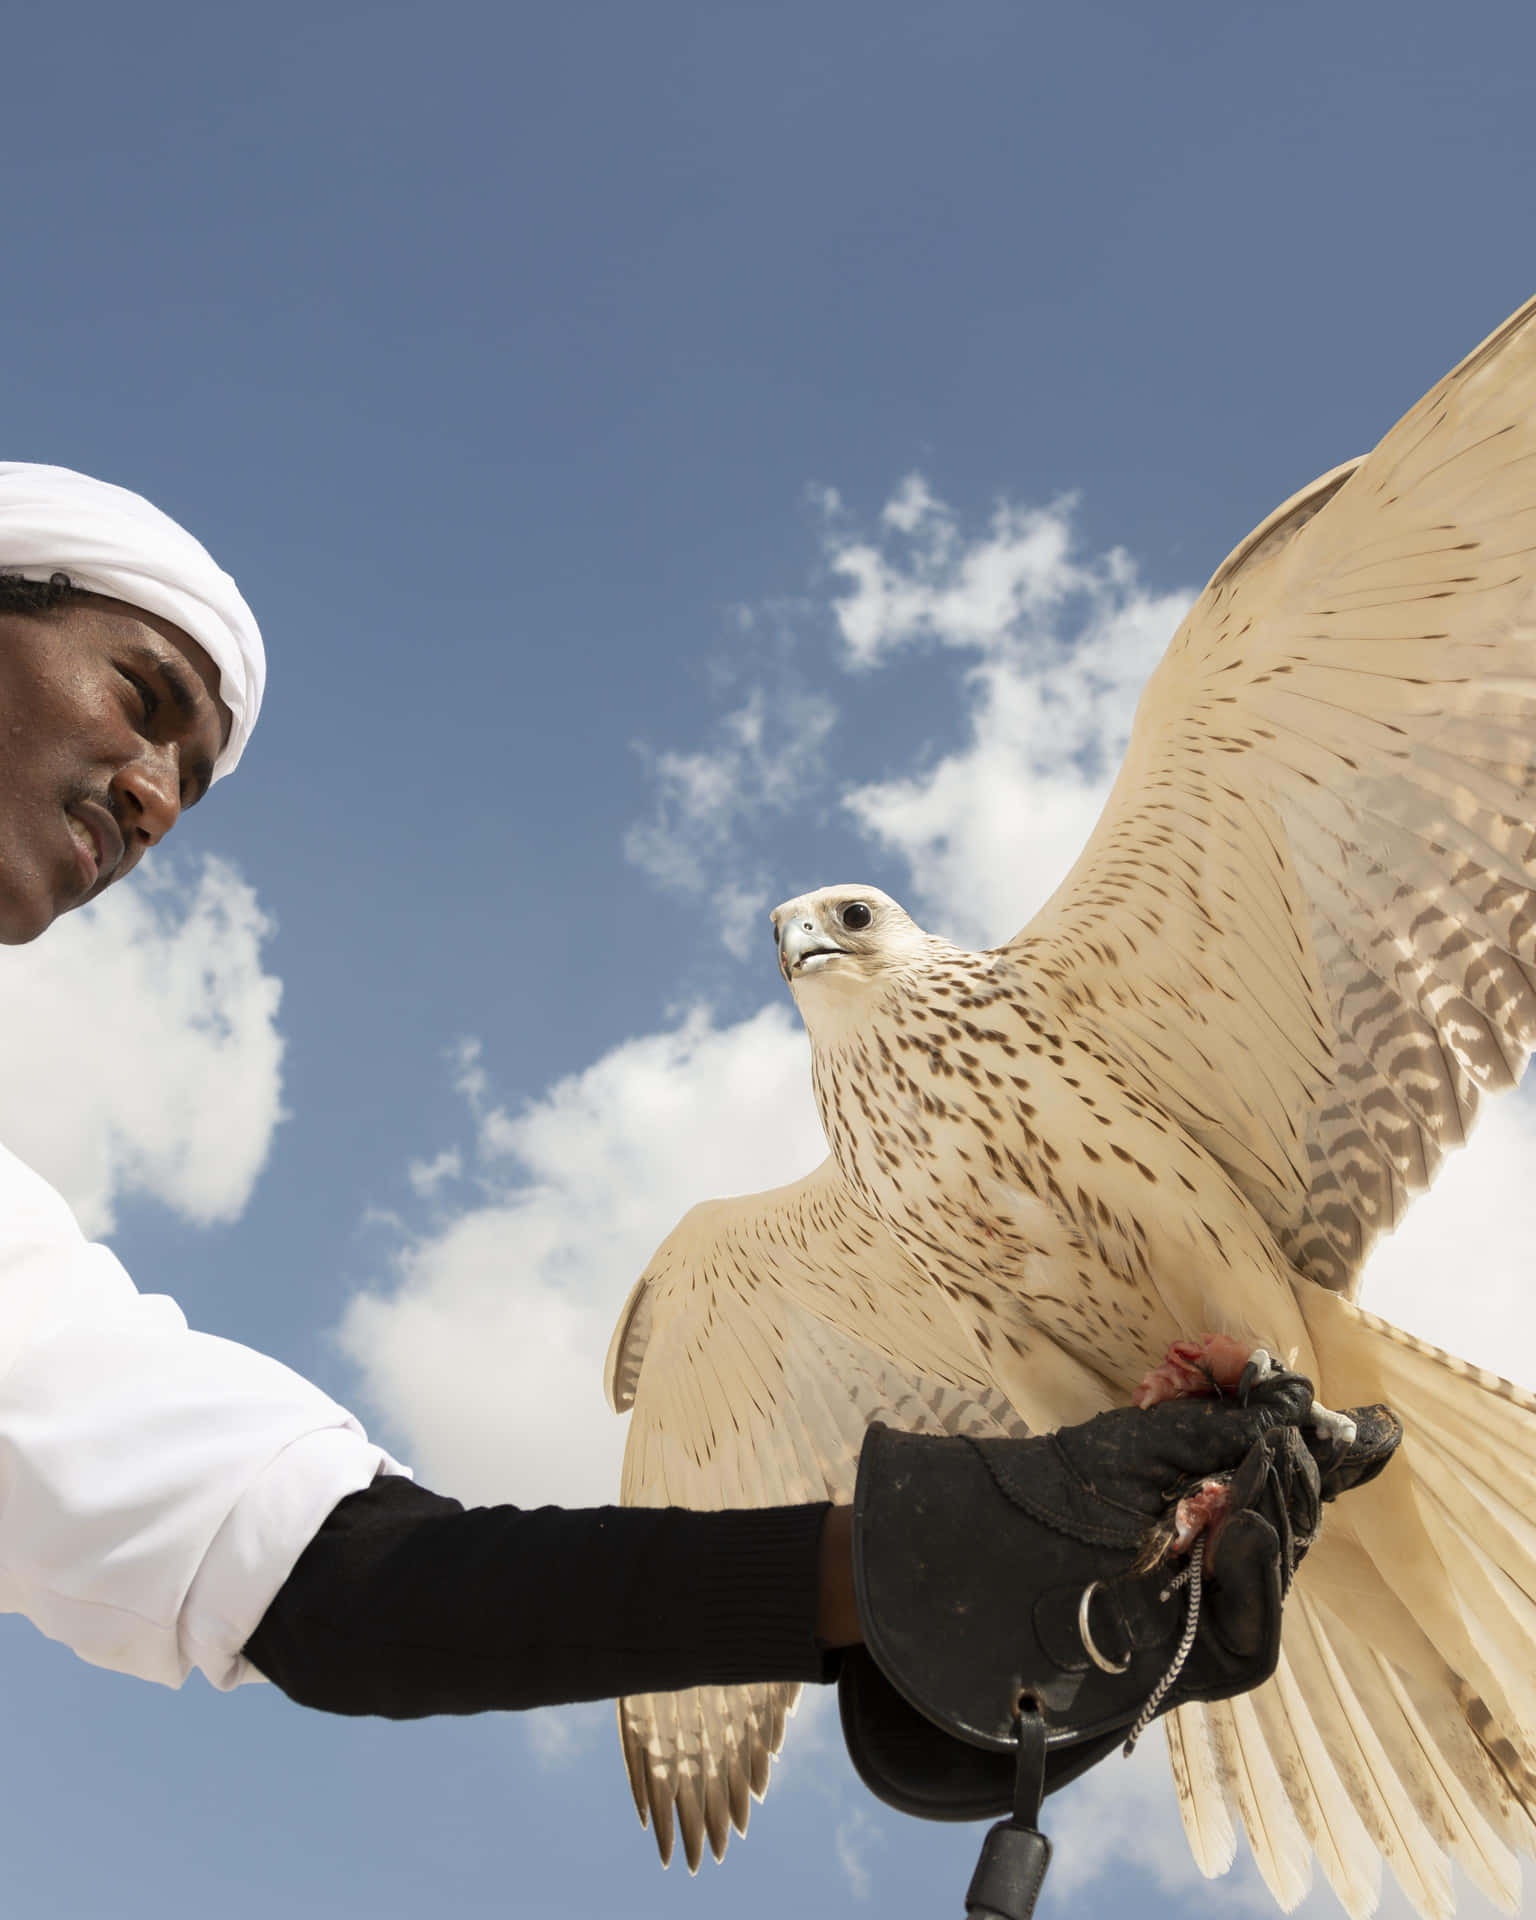 A Superhero Enhances His Signature Look With The Iconic Falcon Costume